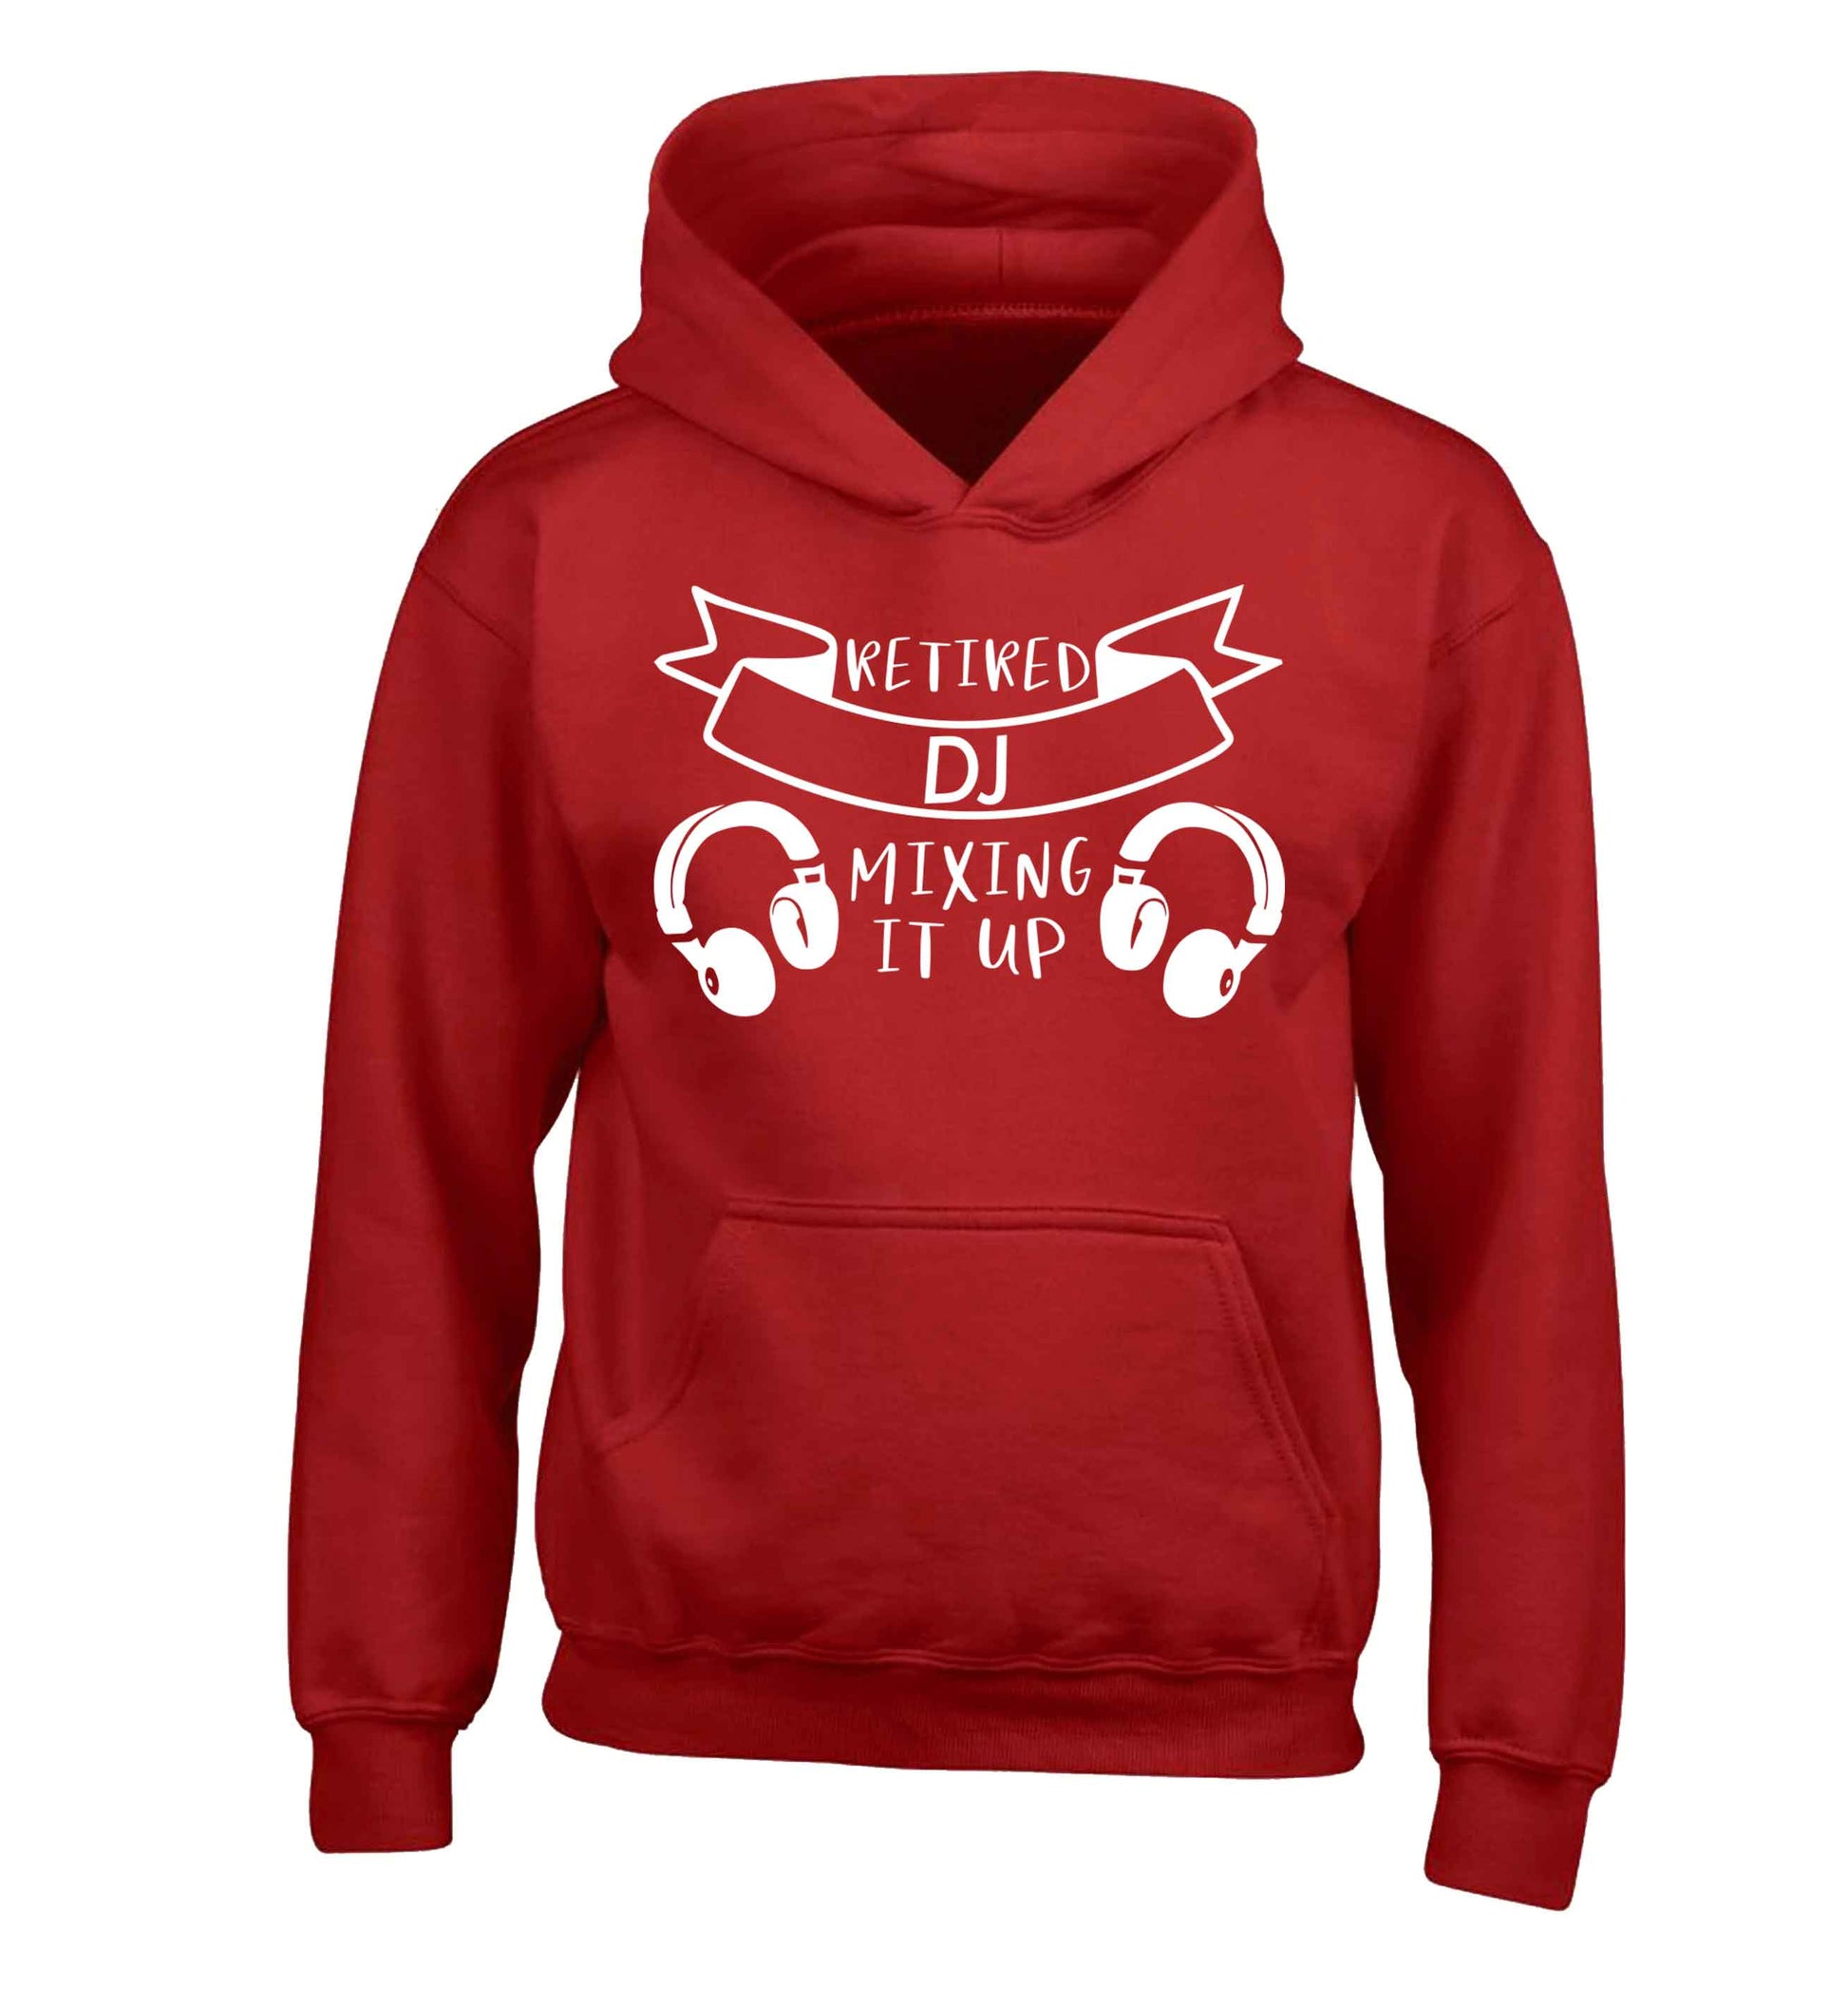 Retired DJ mixing it up children's red hoodie 12-13 Years